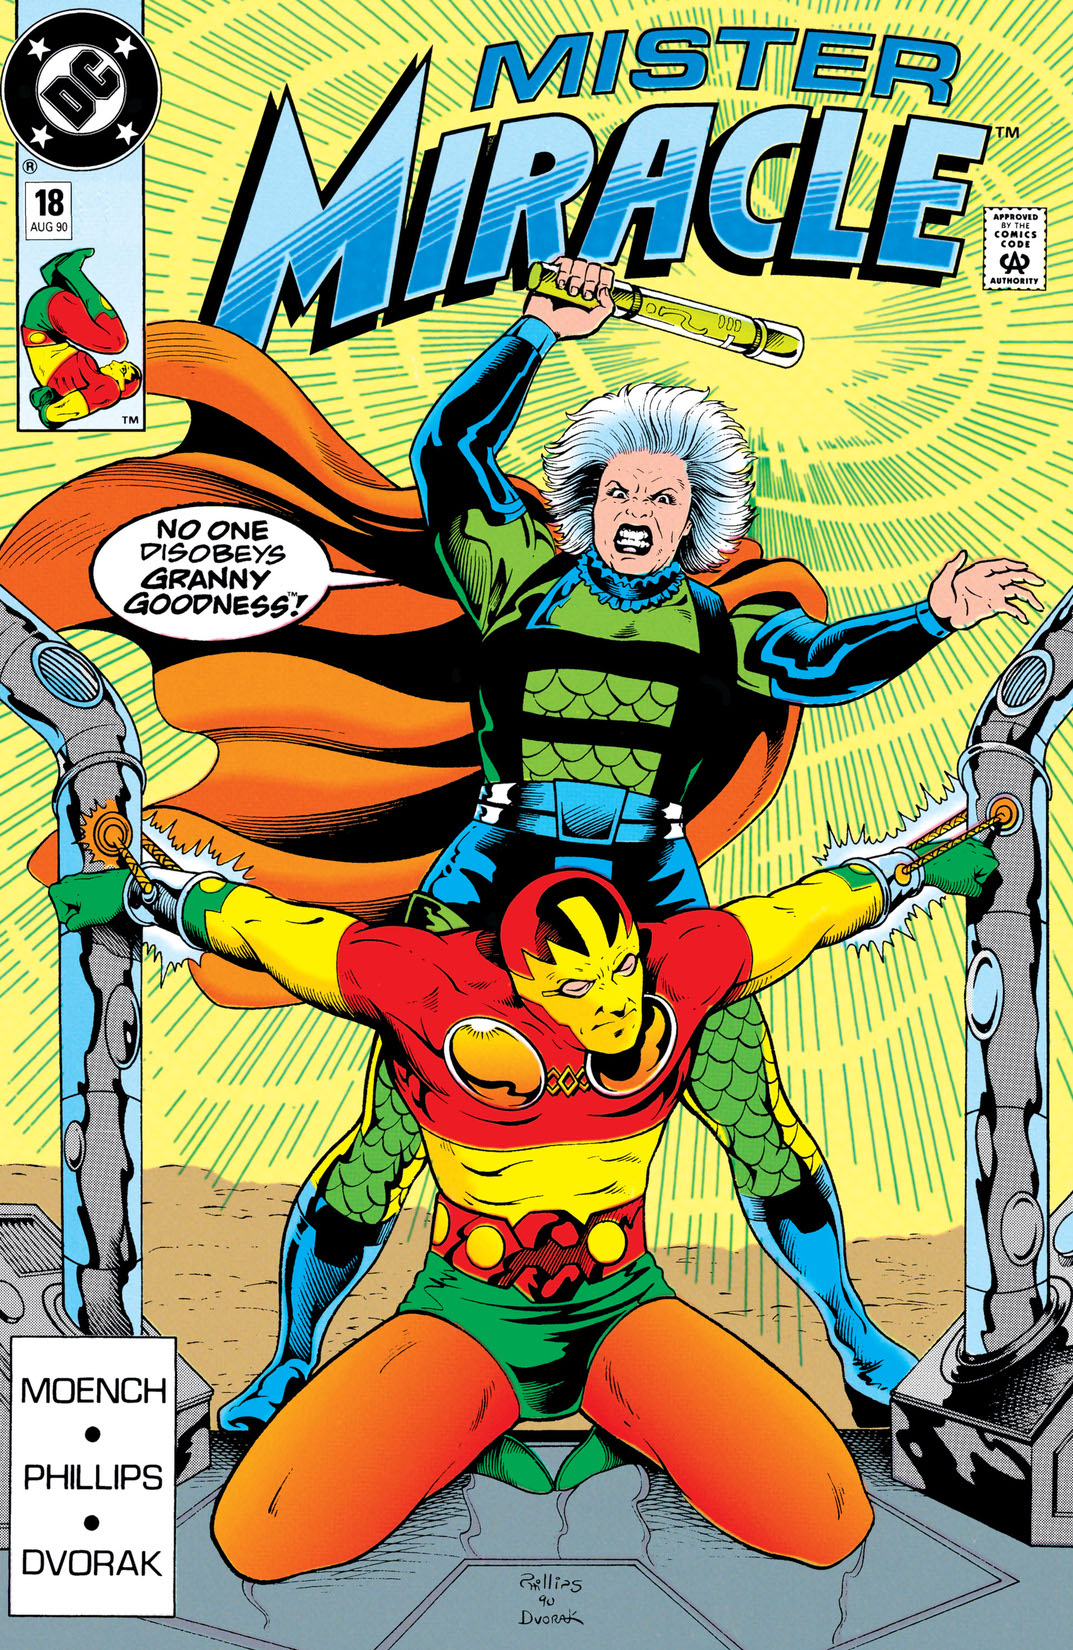 Mister Miracle (1988-) #18 preview images